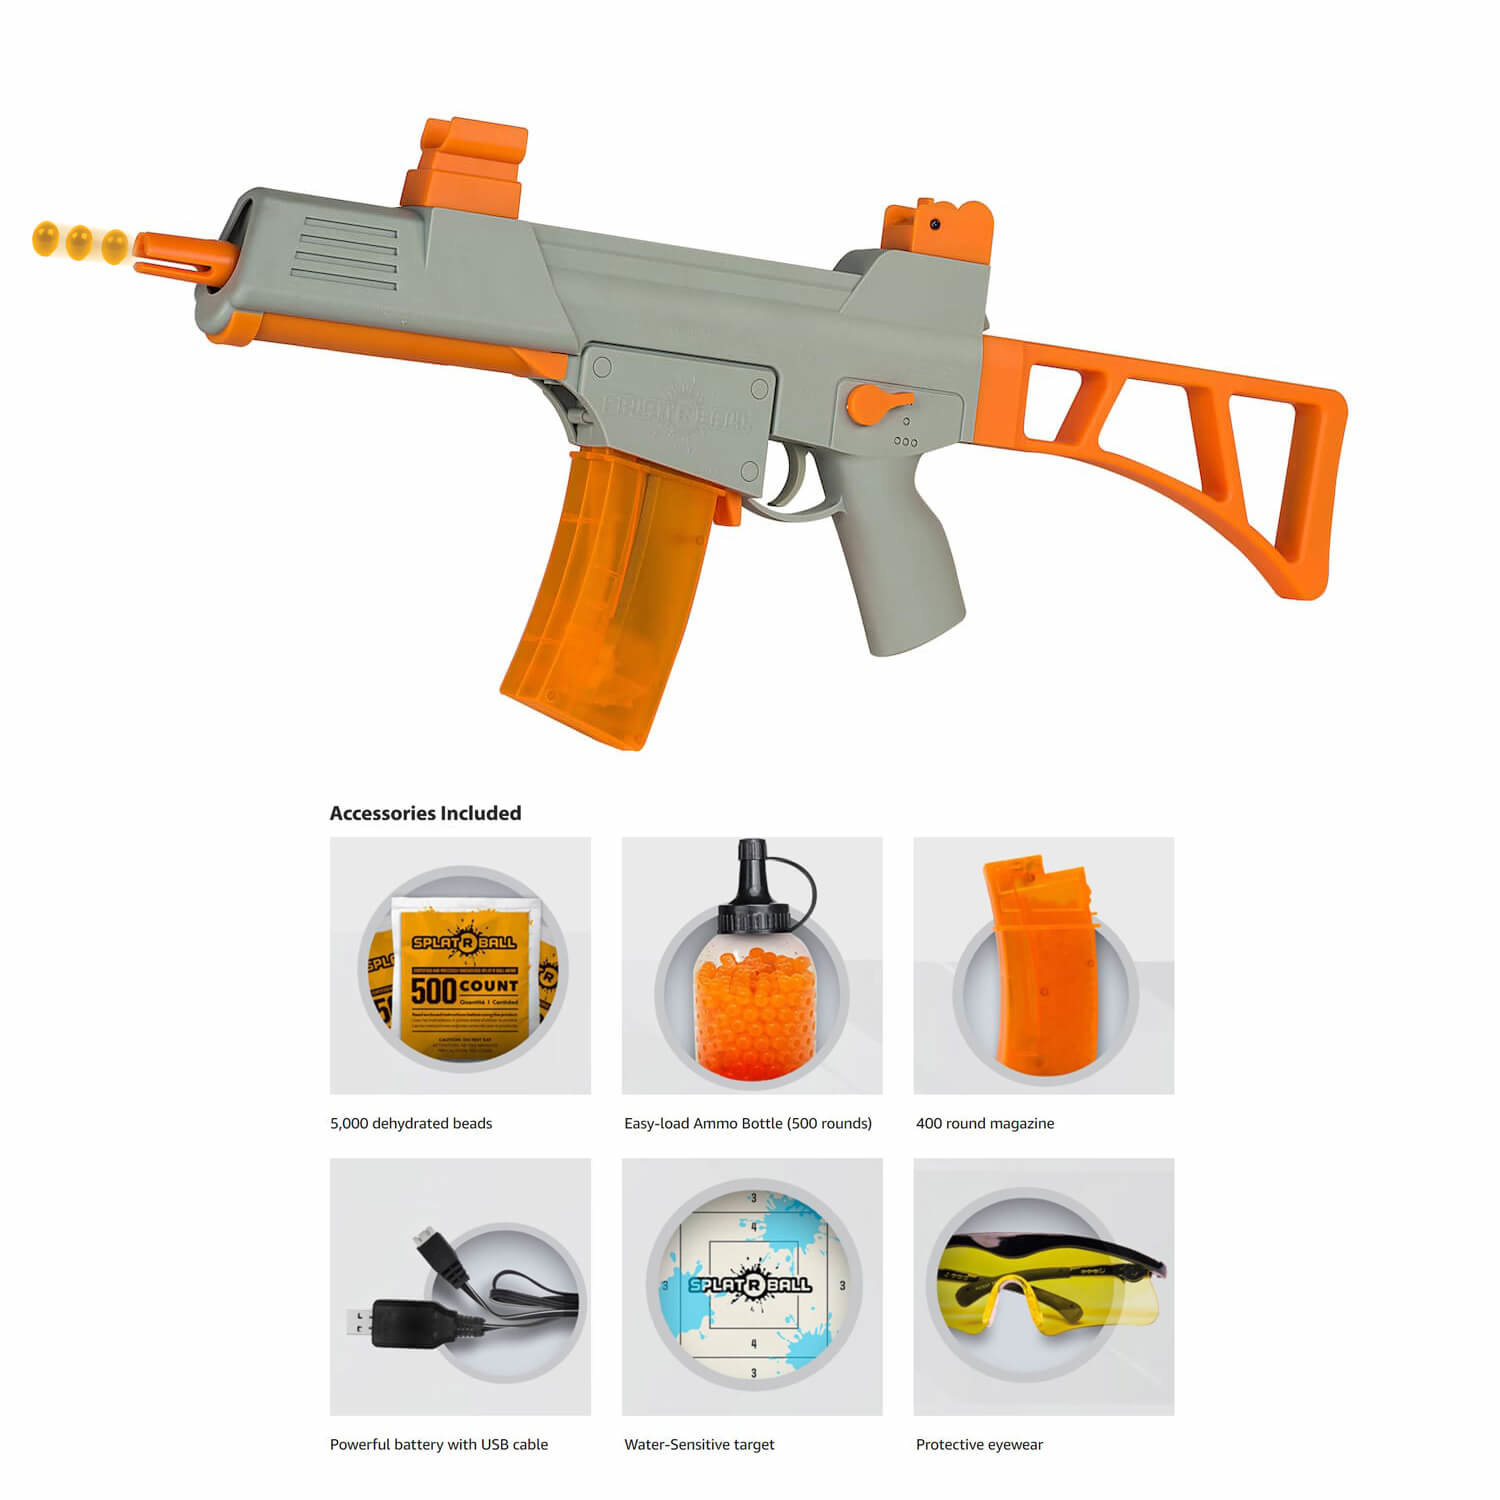 An image showing what's contained in a SplatRBall SRB400 Kit, which is sold at Walmart stores